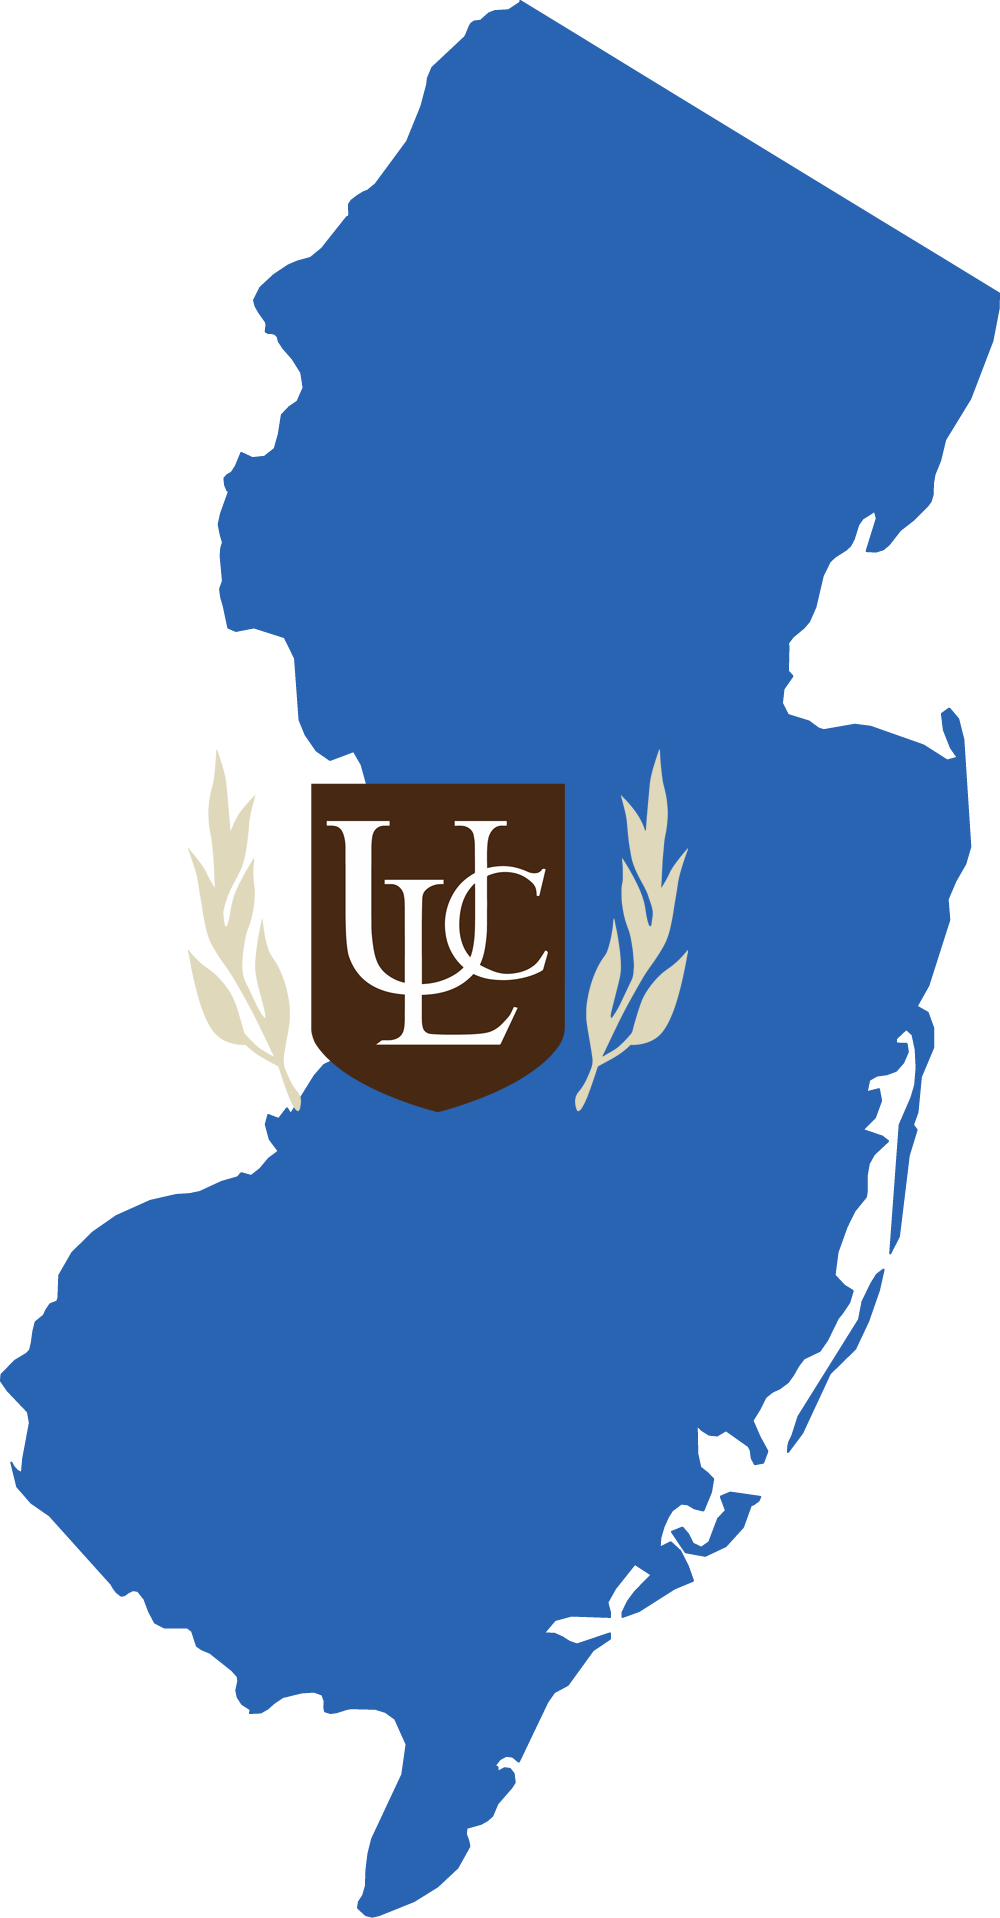 An outline of New Jersey with the ULC logo